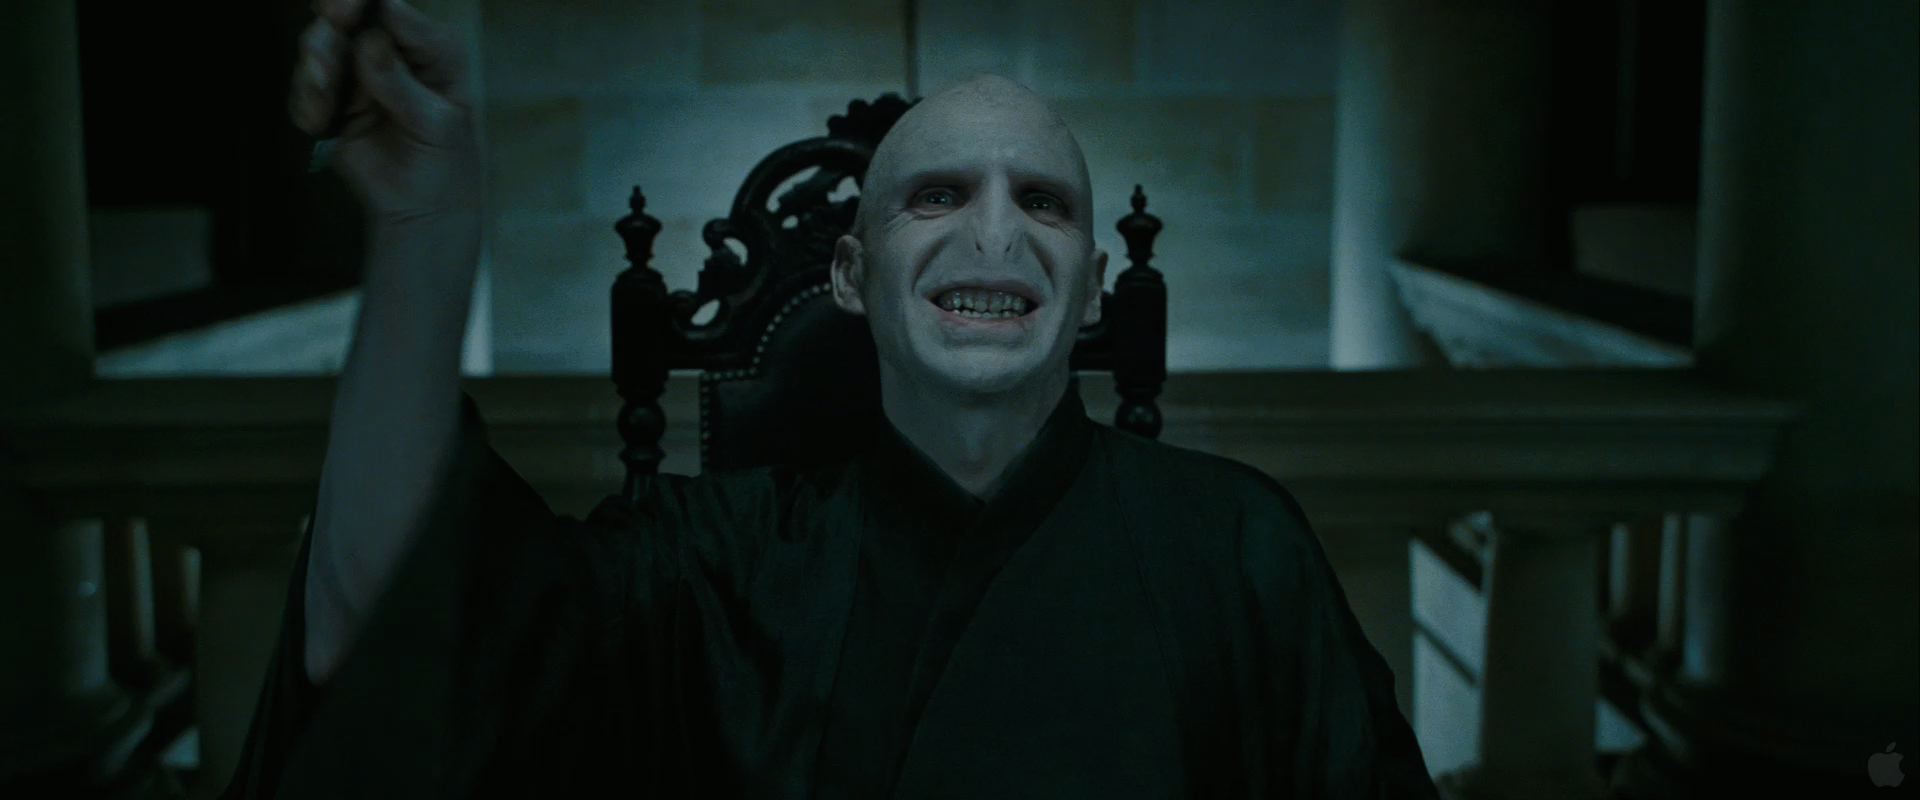 Lord Voldemort From Harry Potter And The Deathly Hallows Wallpaper